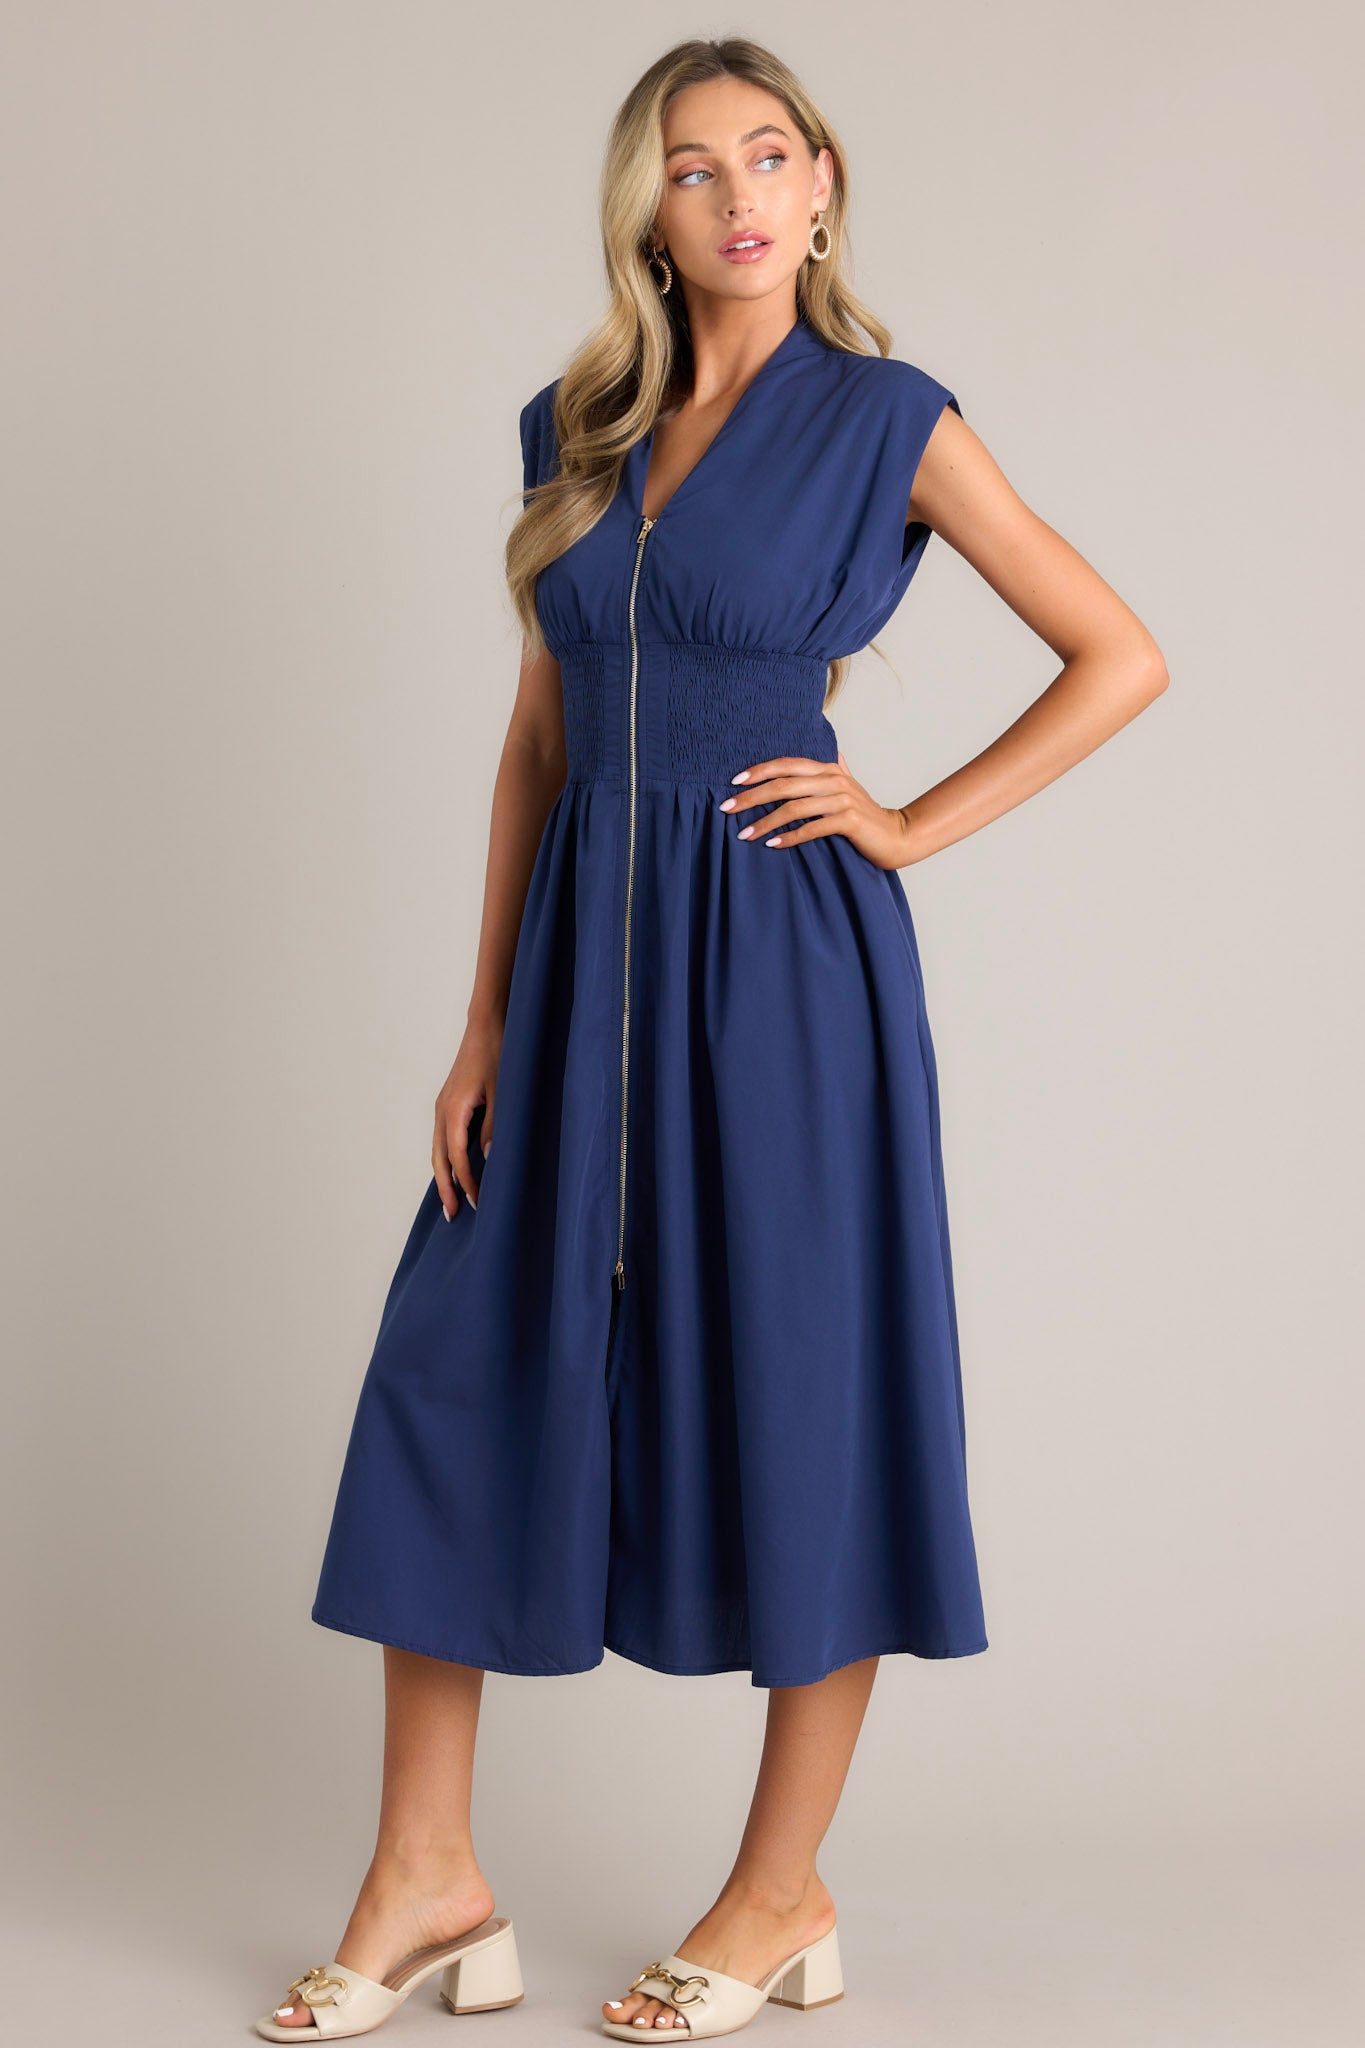 Side view of a navy blue dress with a V-neckline, cap sleeves, a zippered front, and a cinched waist with shirred detailing, featuring a flowing midi-length skirt, highlighting its elegant and stylish design.